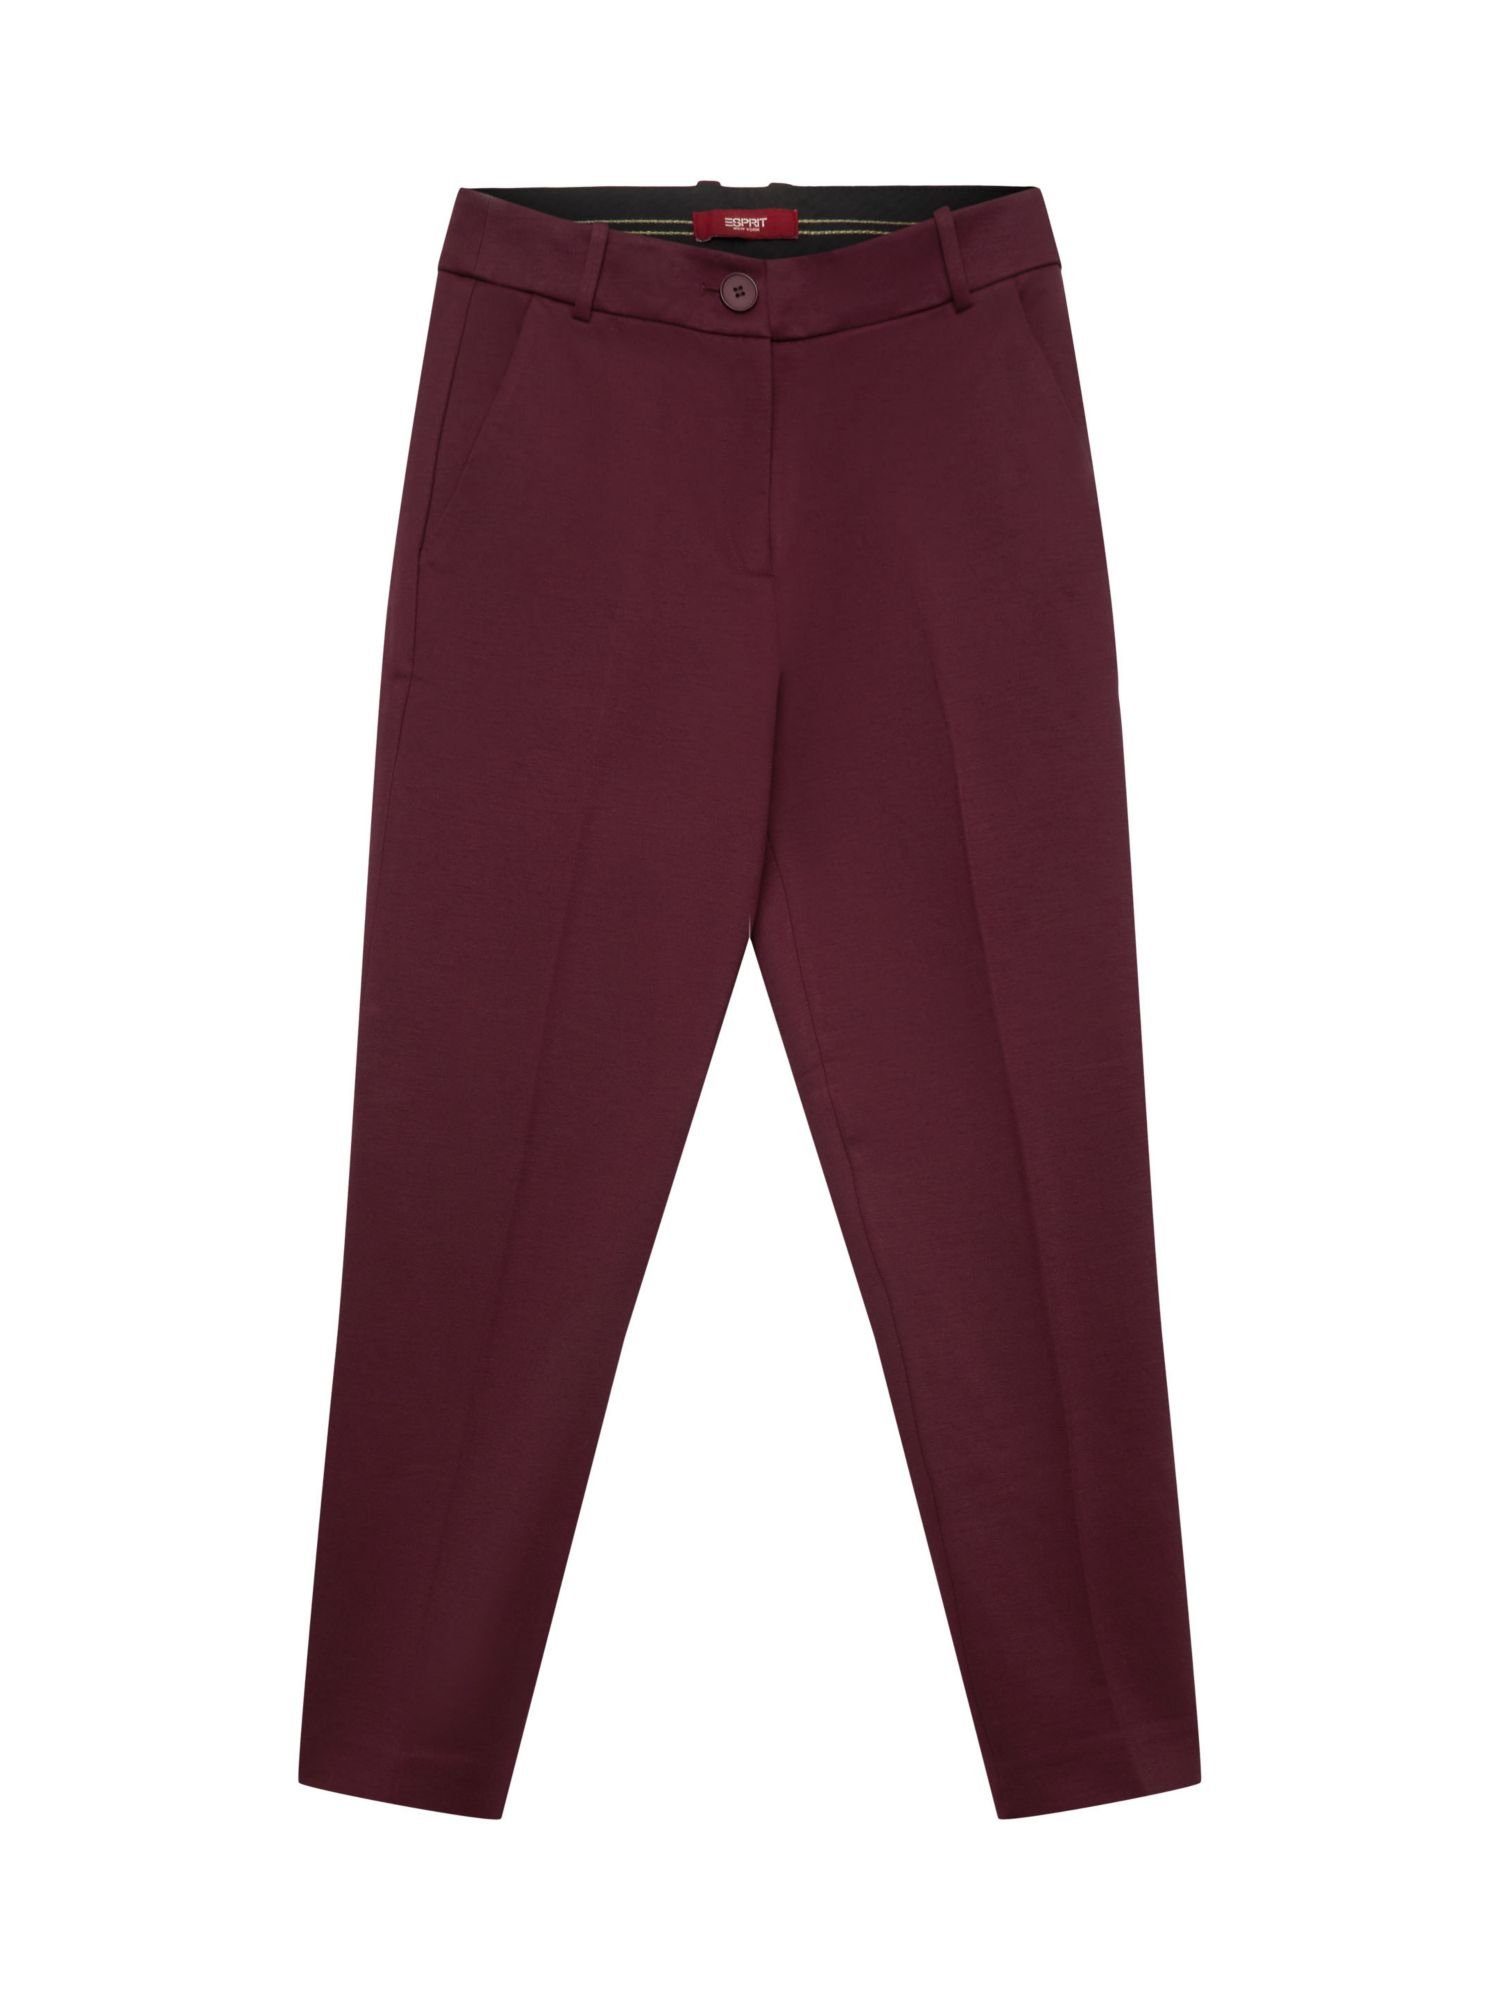 AUBERGINE Collection SPORTY Esprit Stretch-Hose & Pants Match PUNTO Tapered Mix